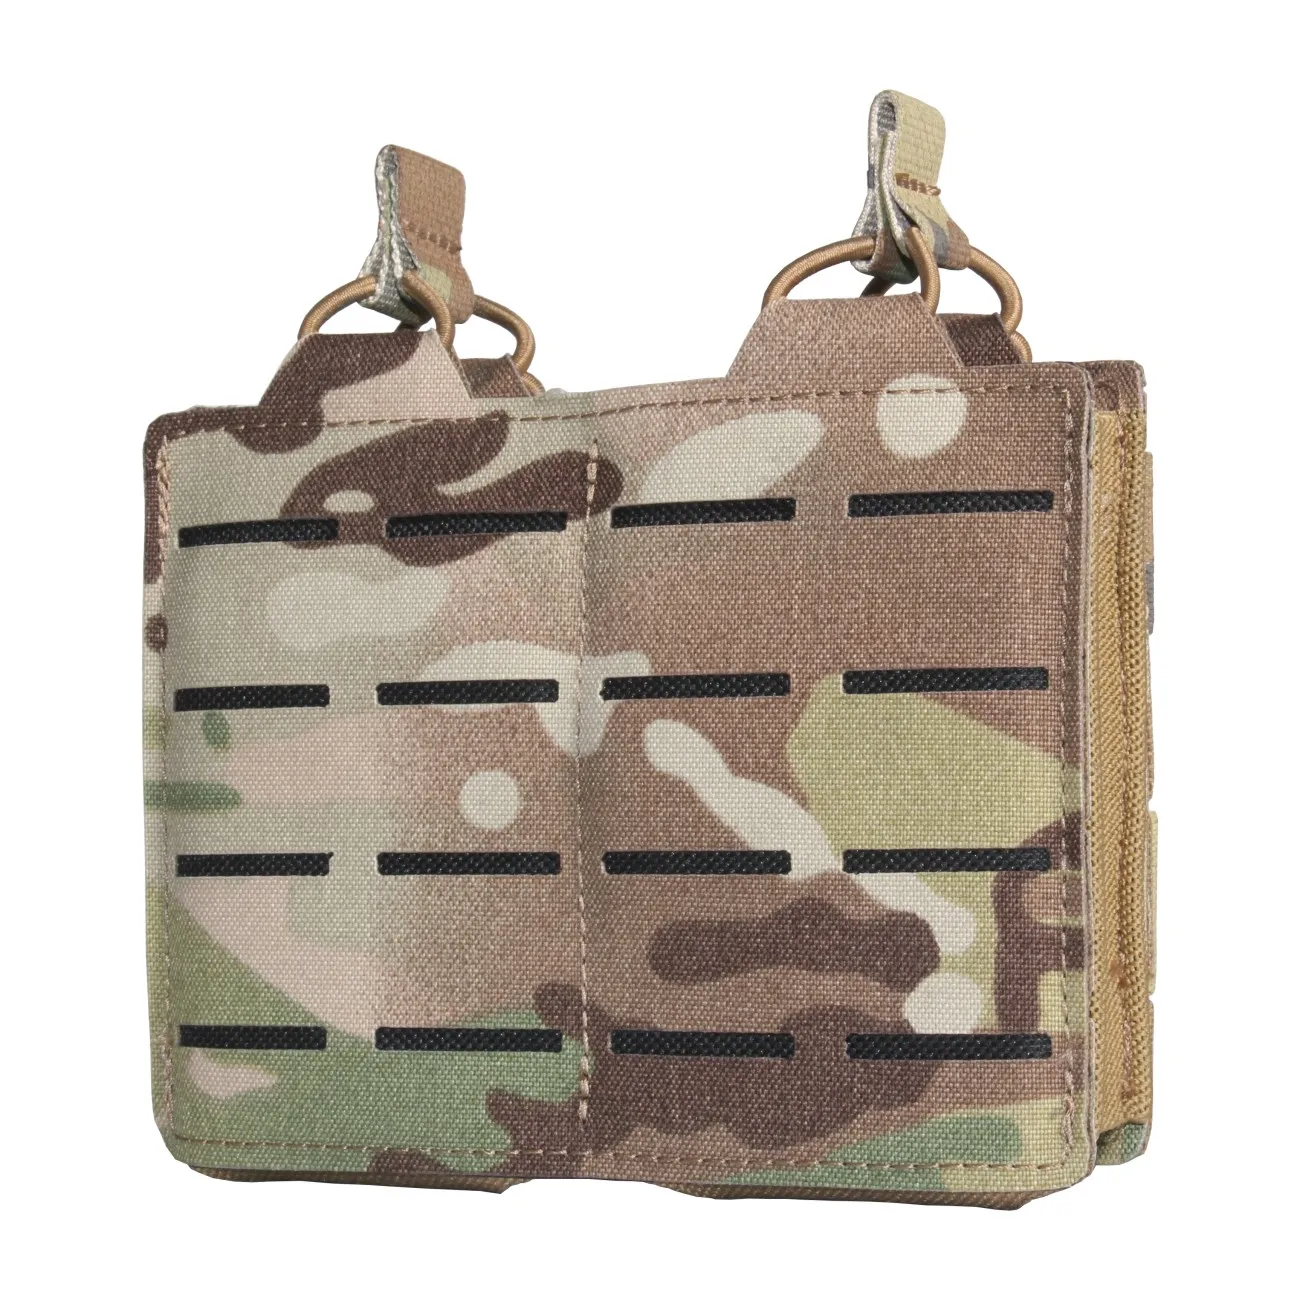 

Warwolf High Quality Men's Field Training Camouflage Magazine Tactical Vest Accessories Double Magazine Bag